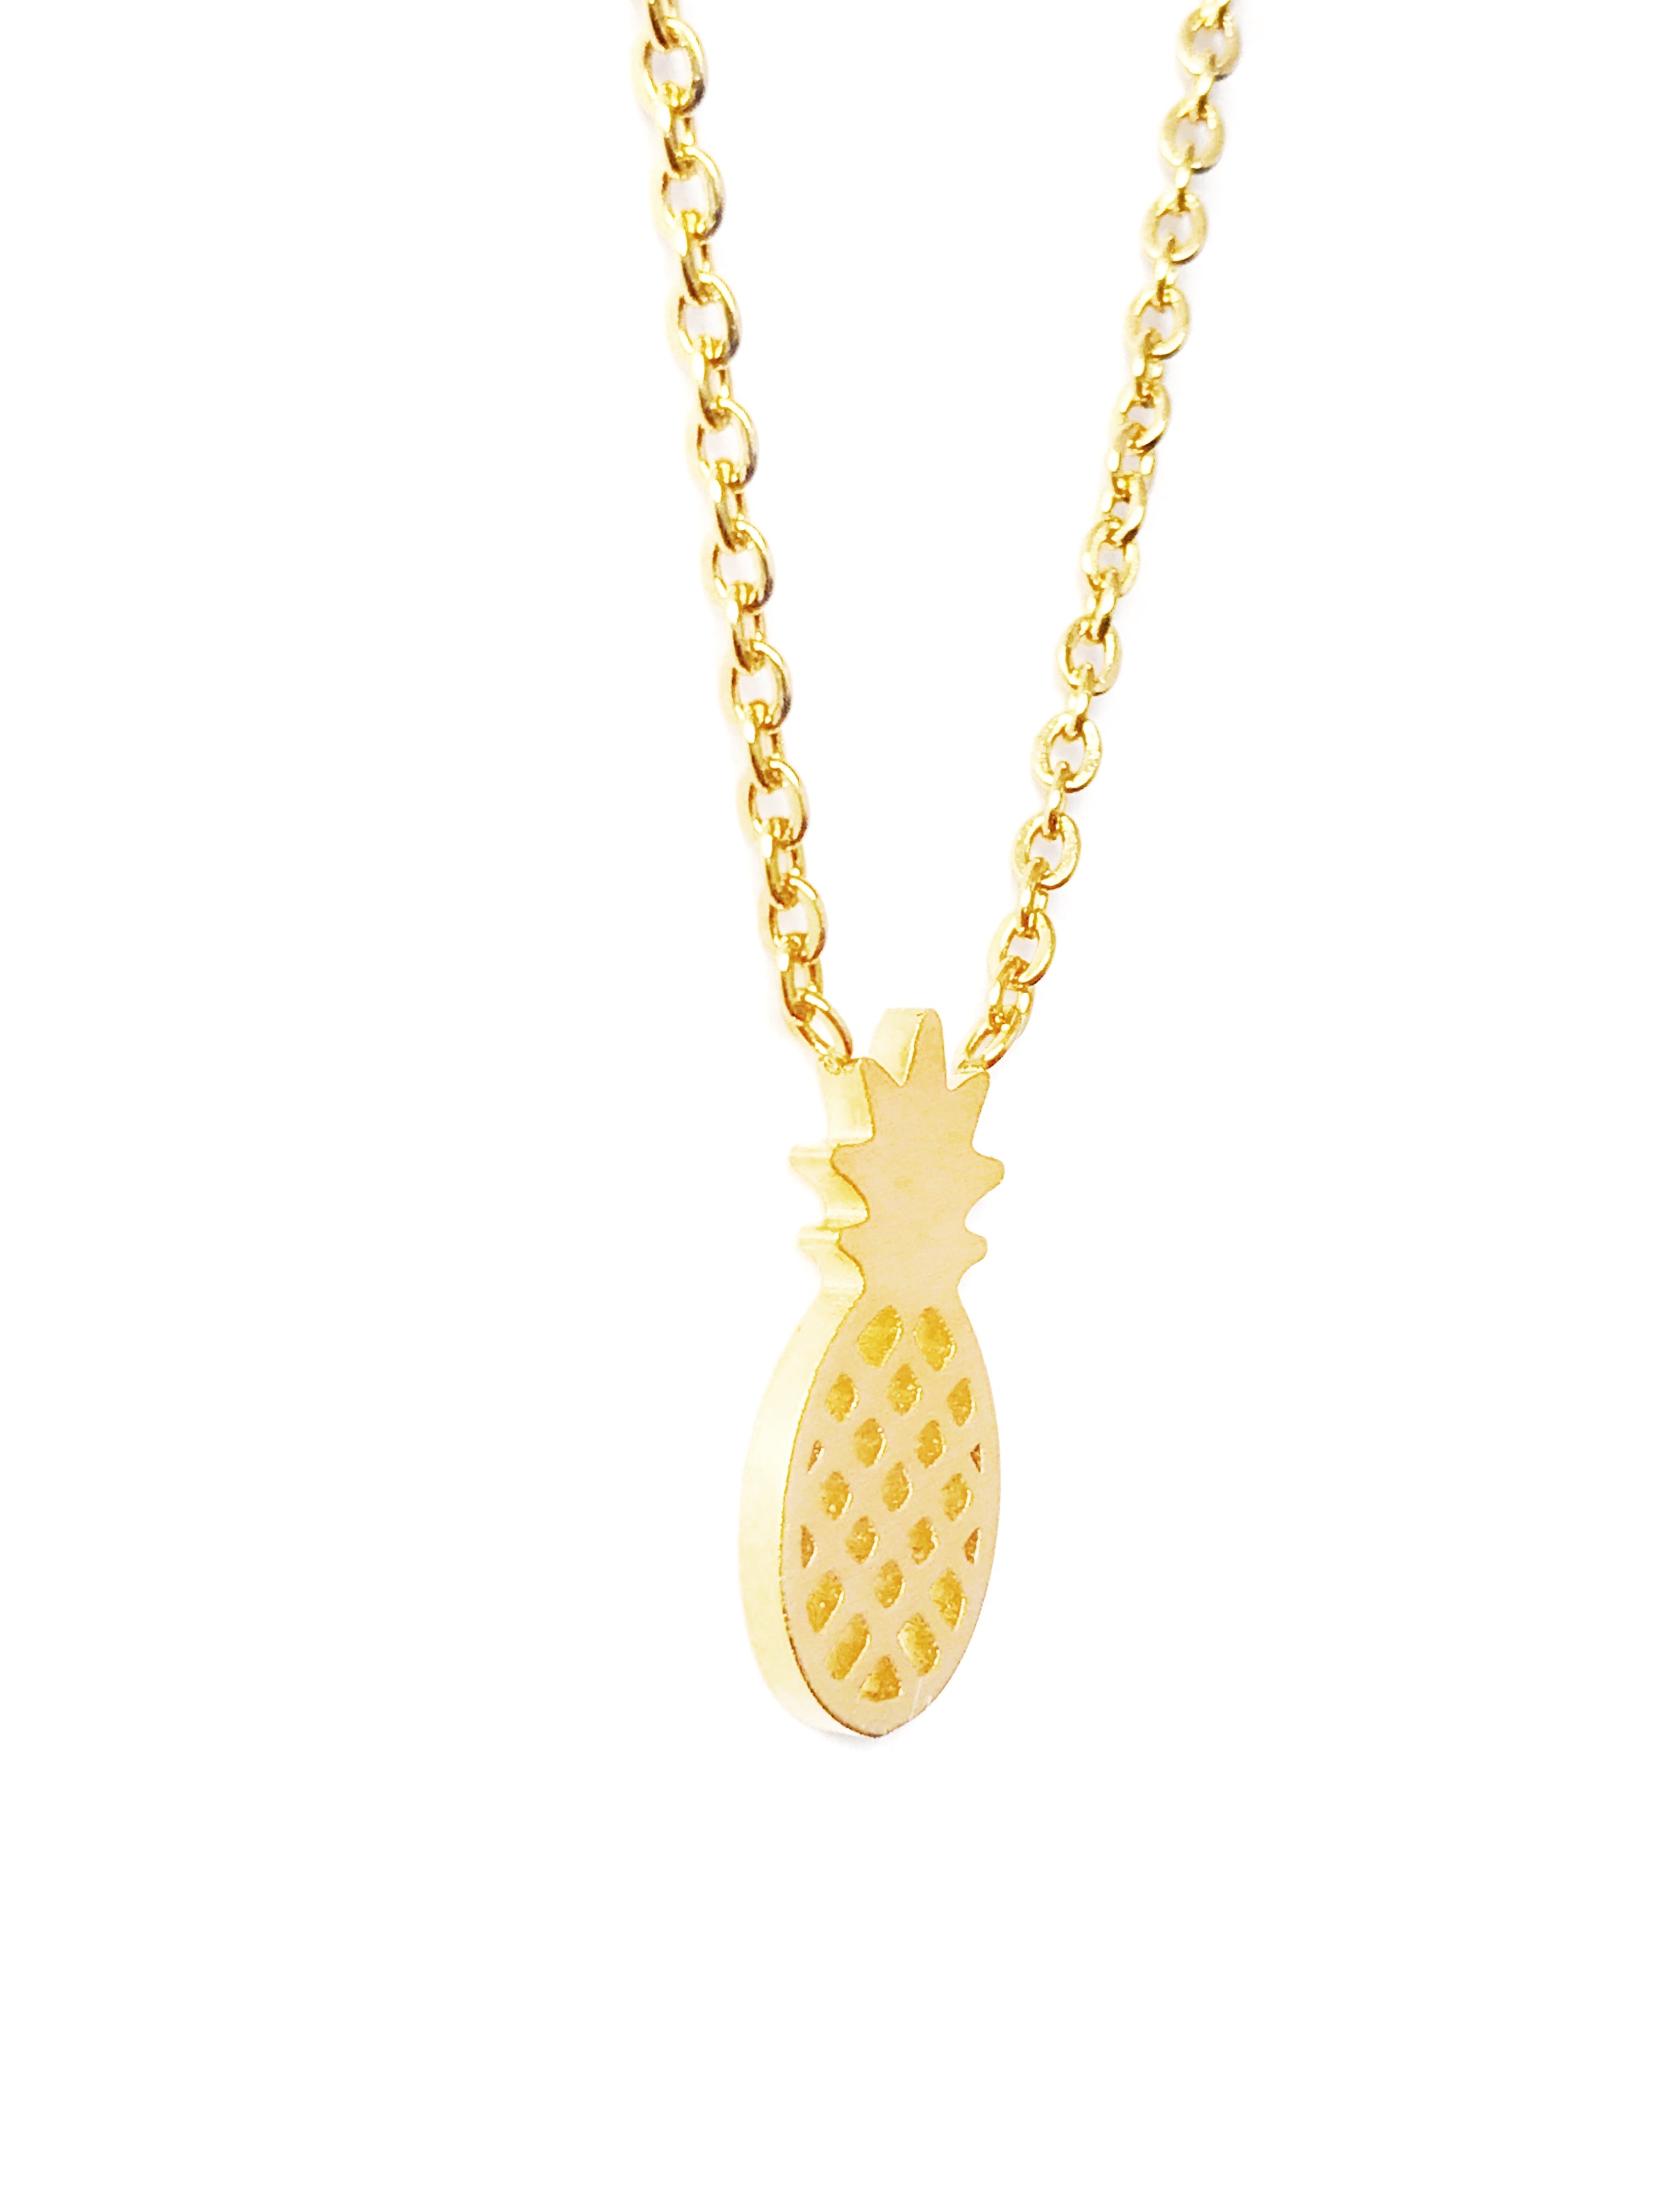 Pineapple Necklace Victoria Collection